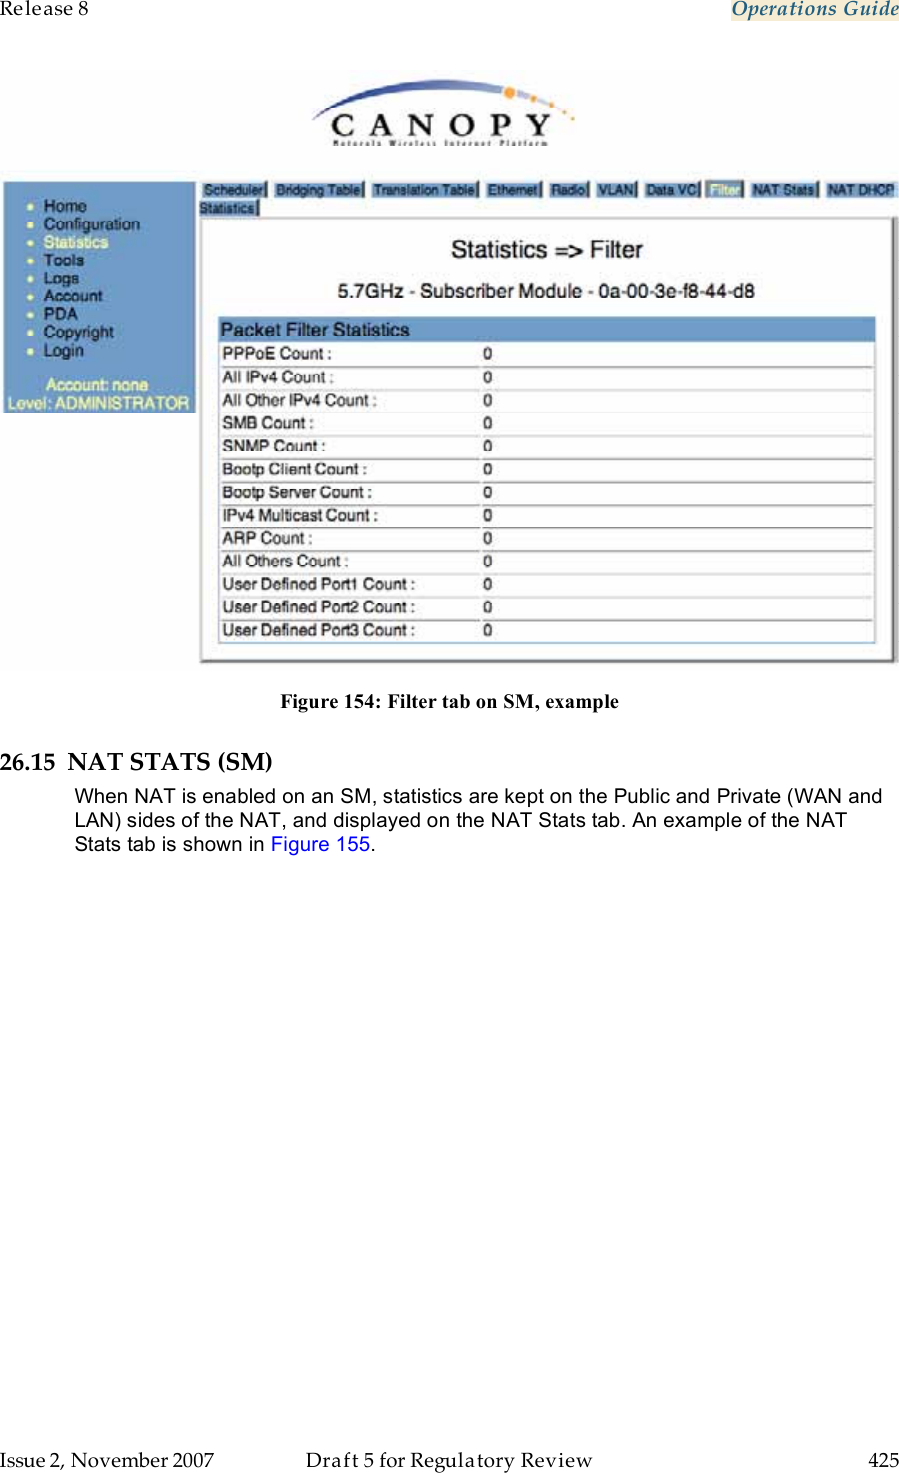 Release 8    Operations Guide   Issue 2, November 2007  Draft 5 for Regulatory Review  425      Figure 154: Filter tab on SM, example 26.15 NAT STATS (SM) When NAT is enabled on an SM, statistics are kept on the Public and Private (WAN and LAN) sides of the NAT, and displayed on the NAT Stats tab. An example of the NAT Stats tab is shown in Figure 155. 